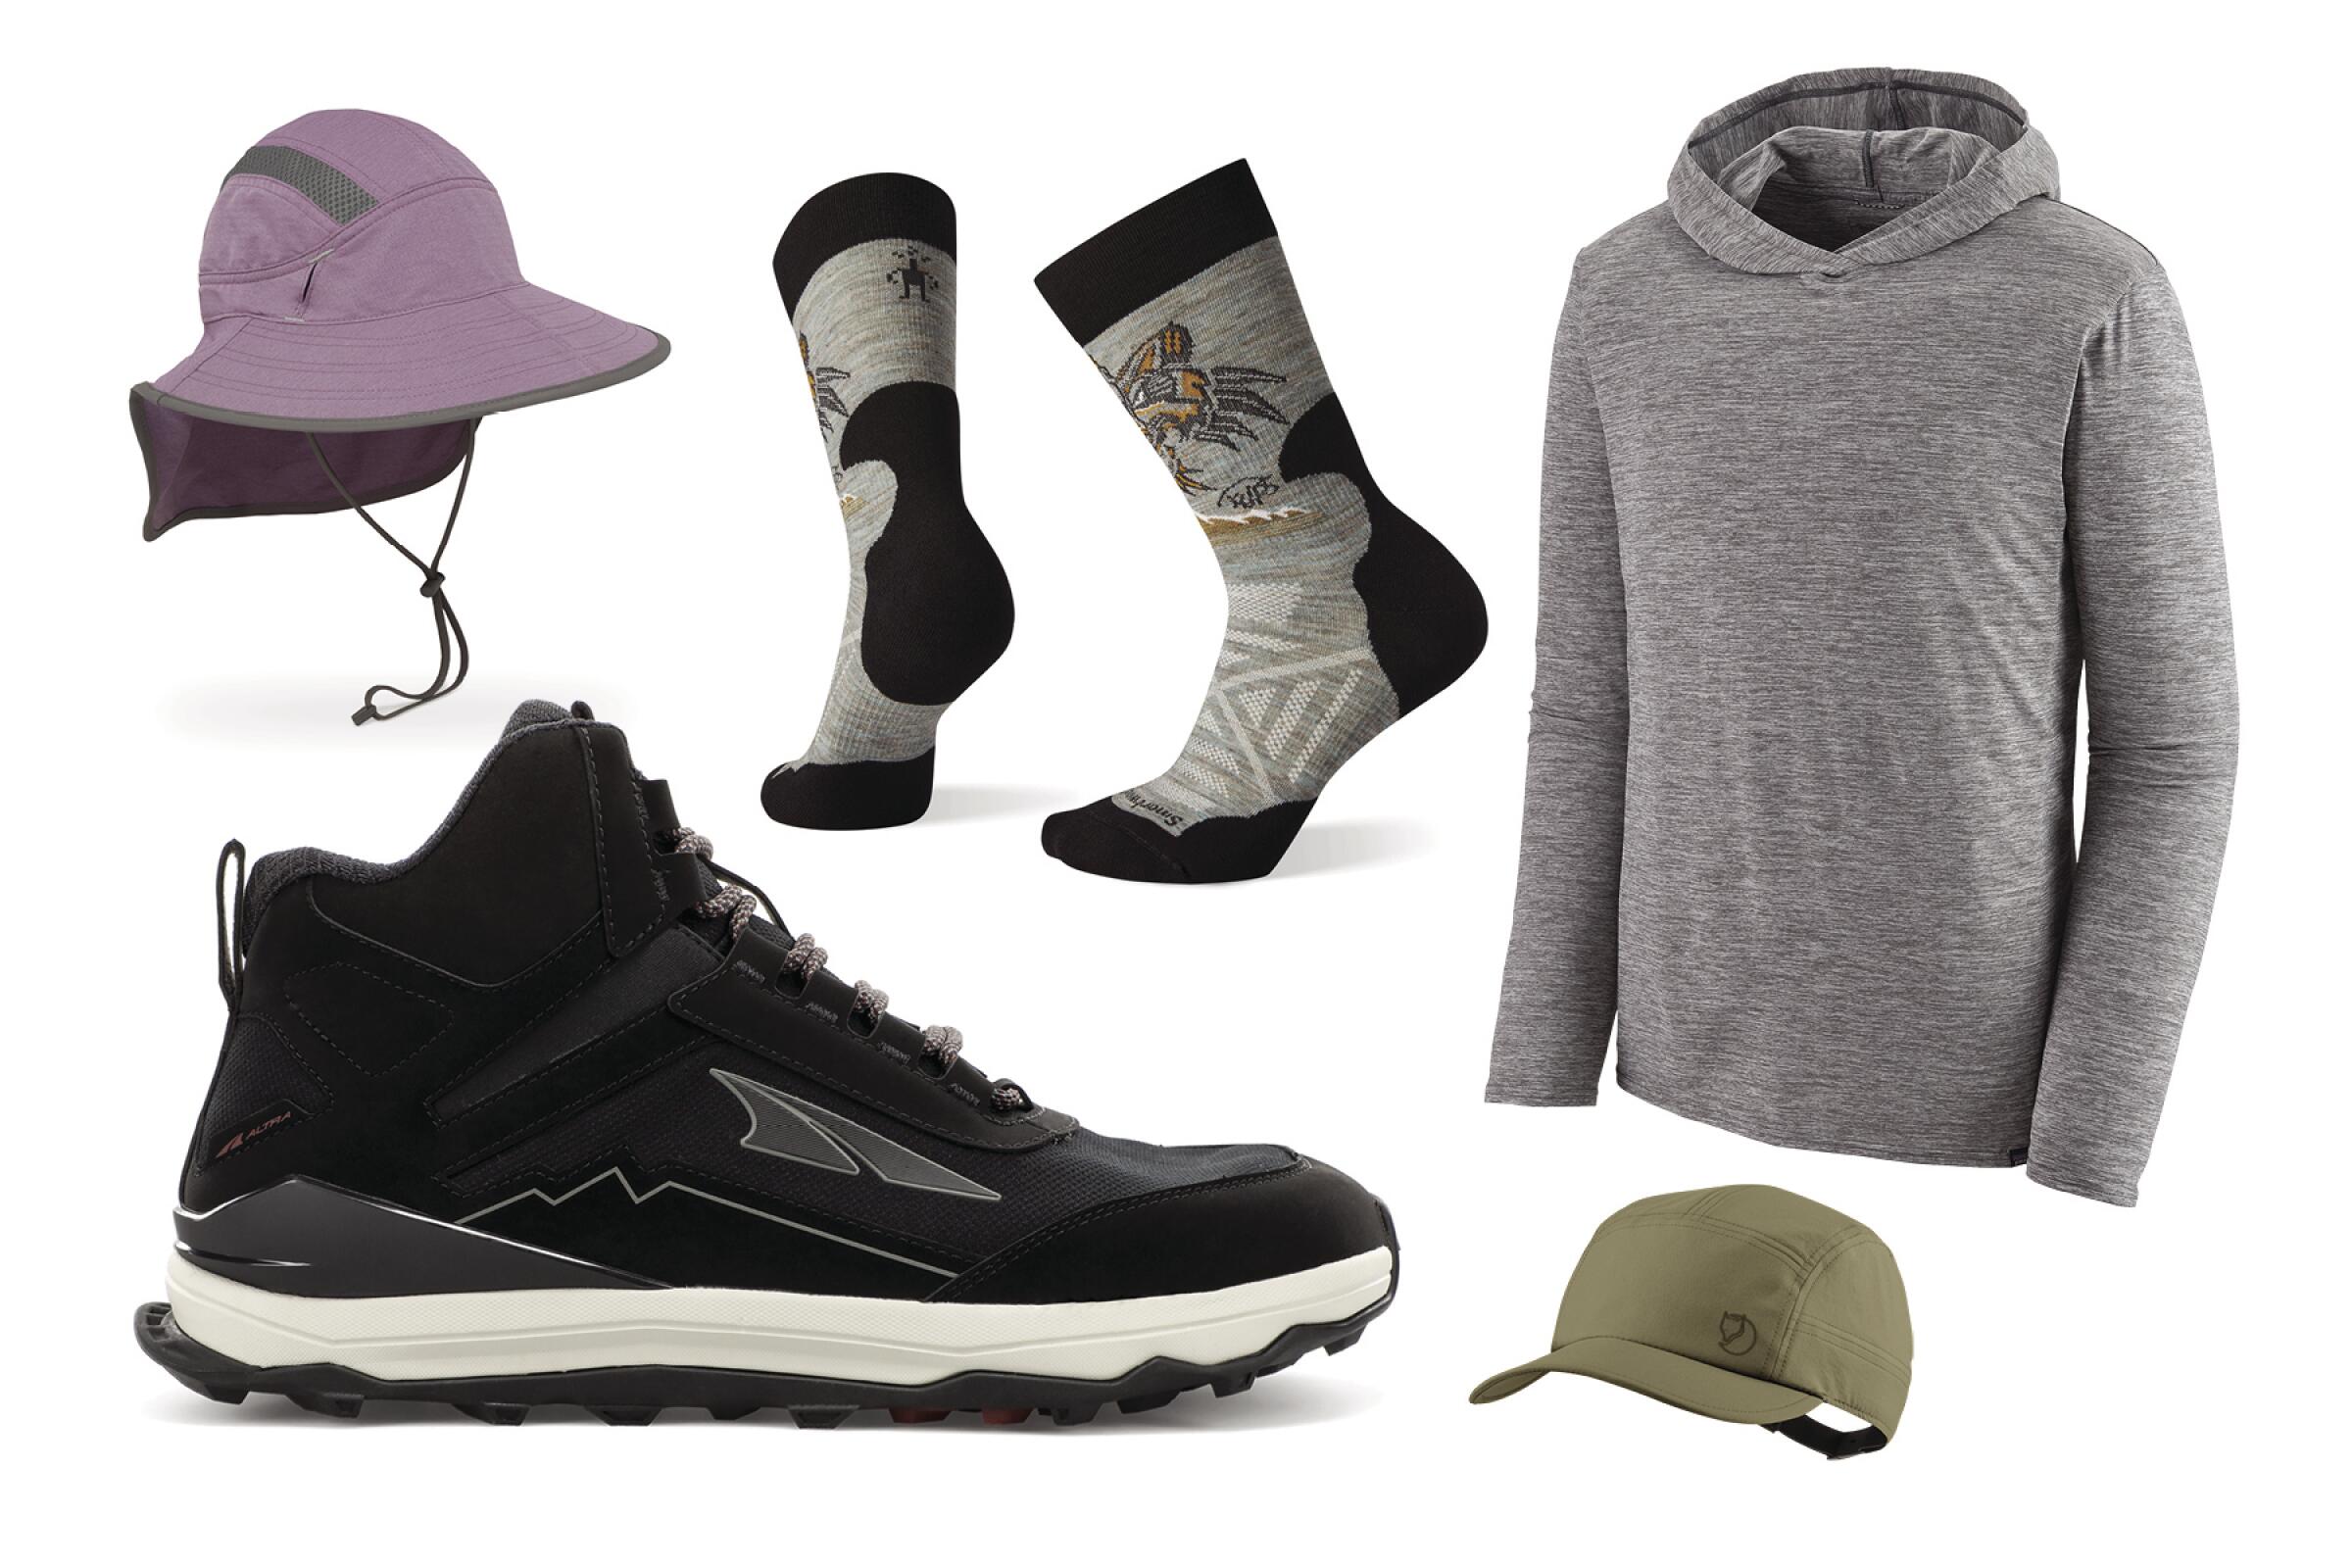 A photo collage of hiking apparel